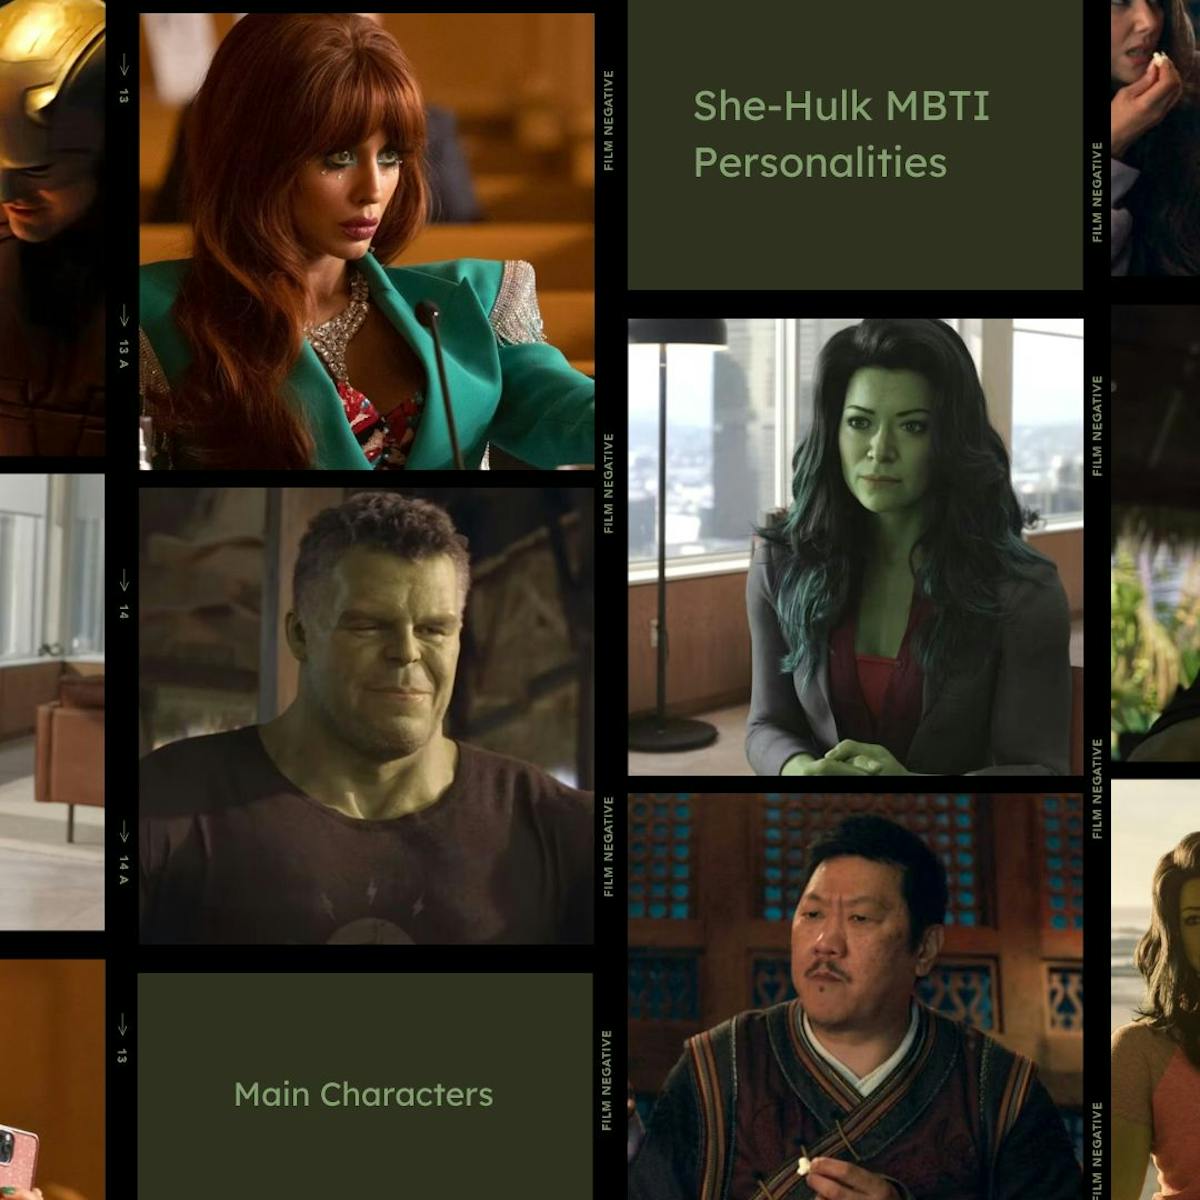 She-Hulk MBTI personality types for main characters